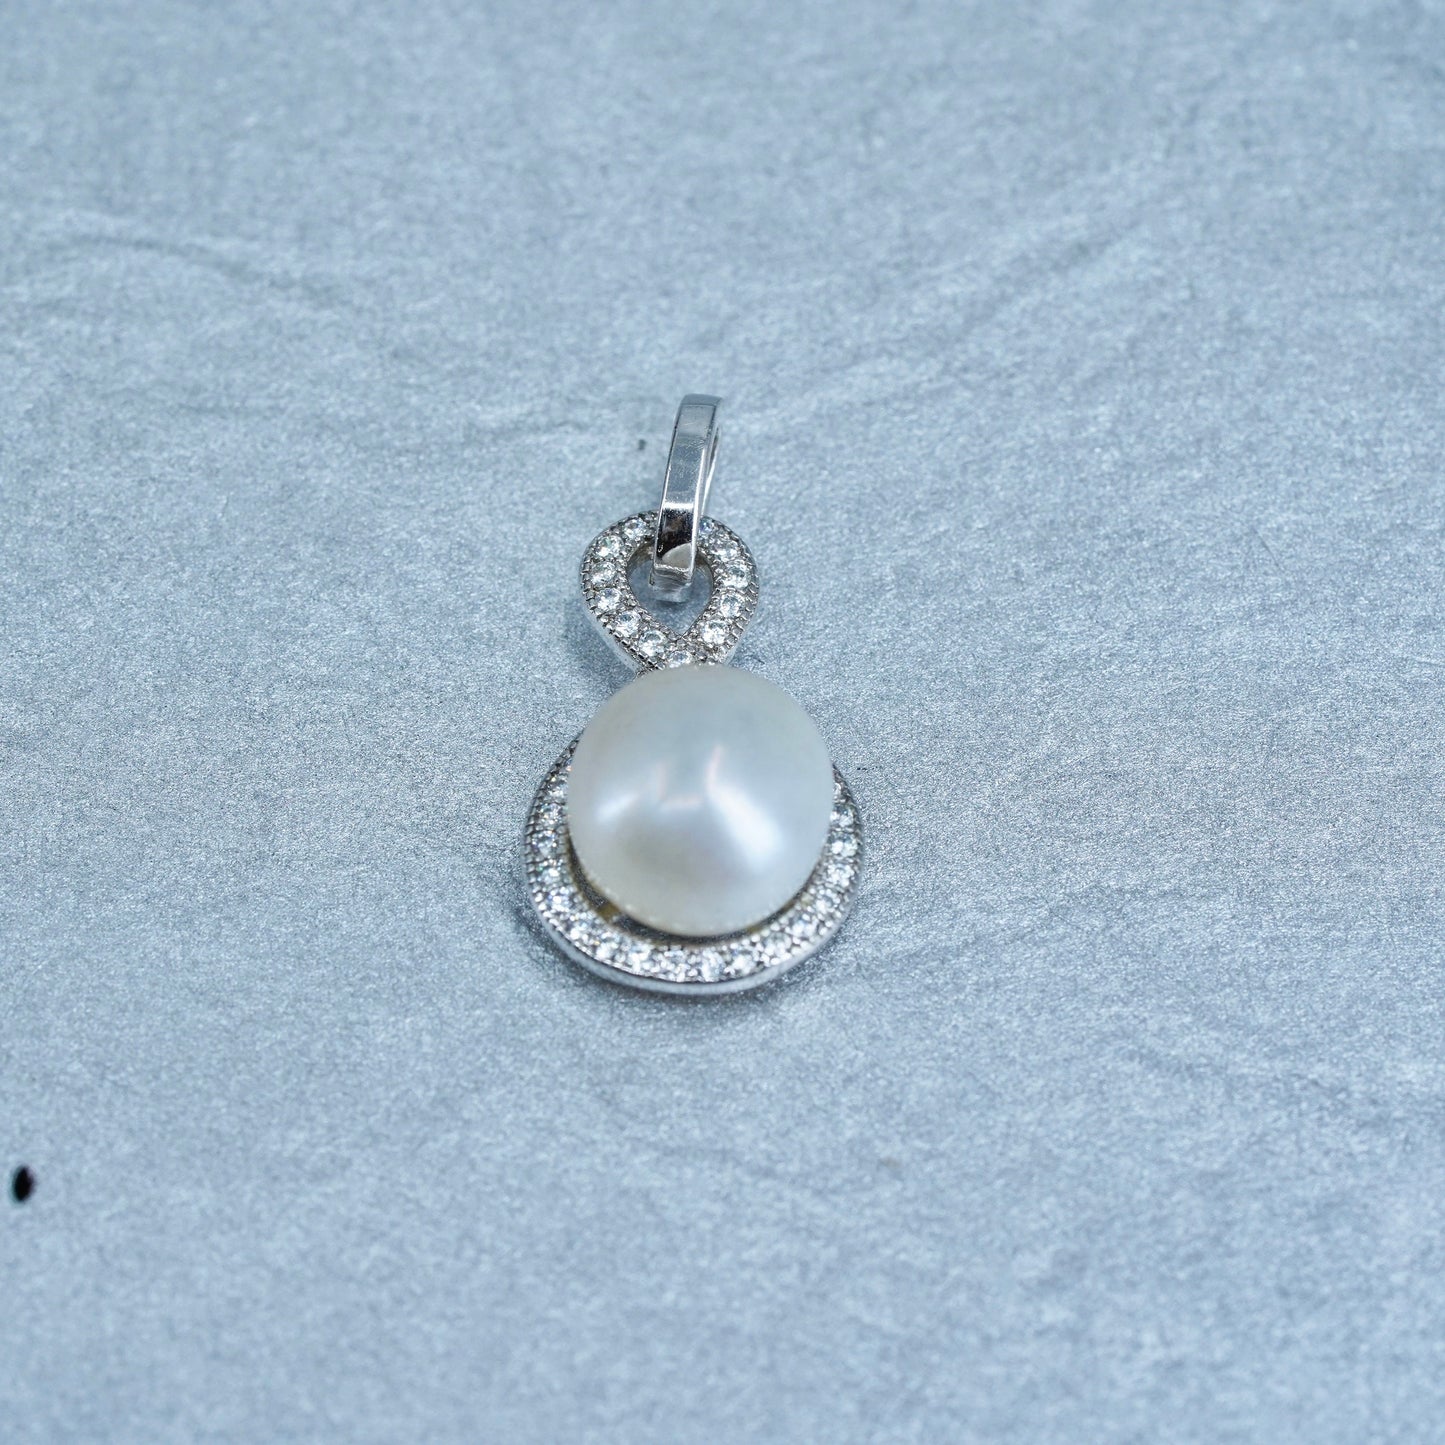 vintage sterling 925 silver handmade charm pendant with pearl and Cz